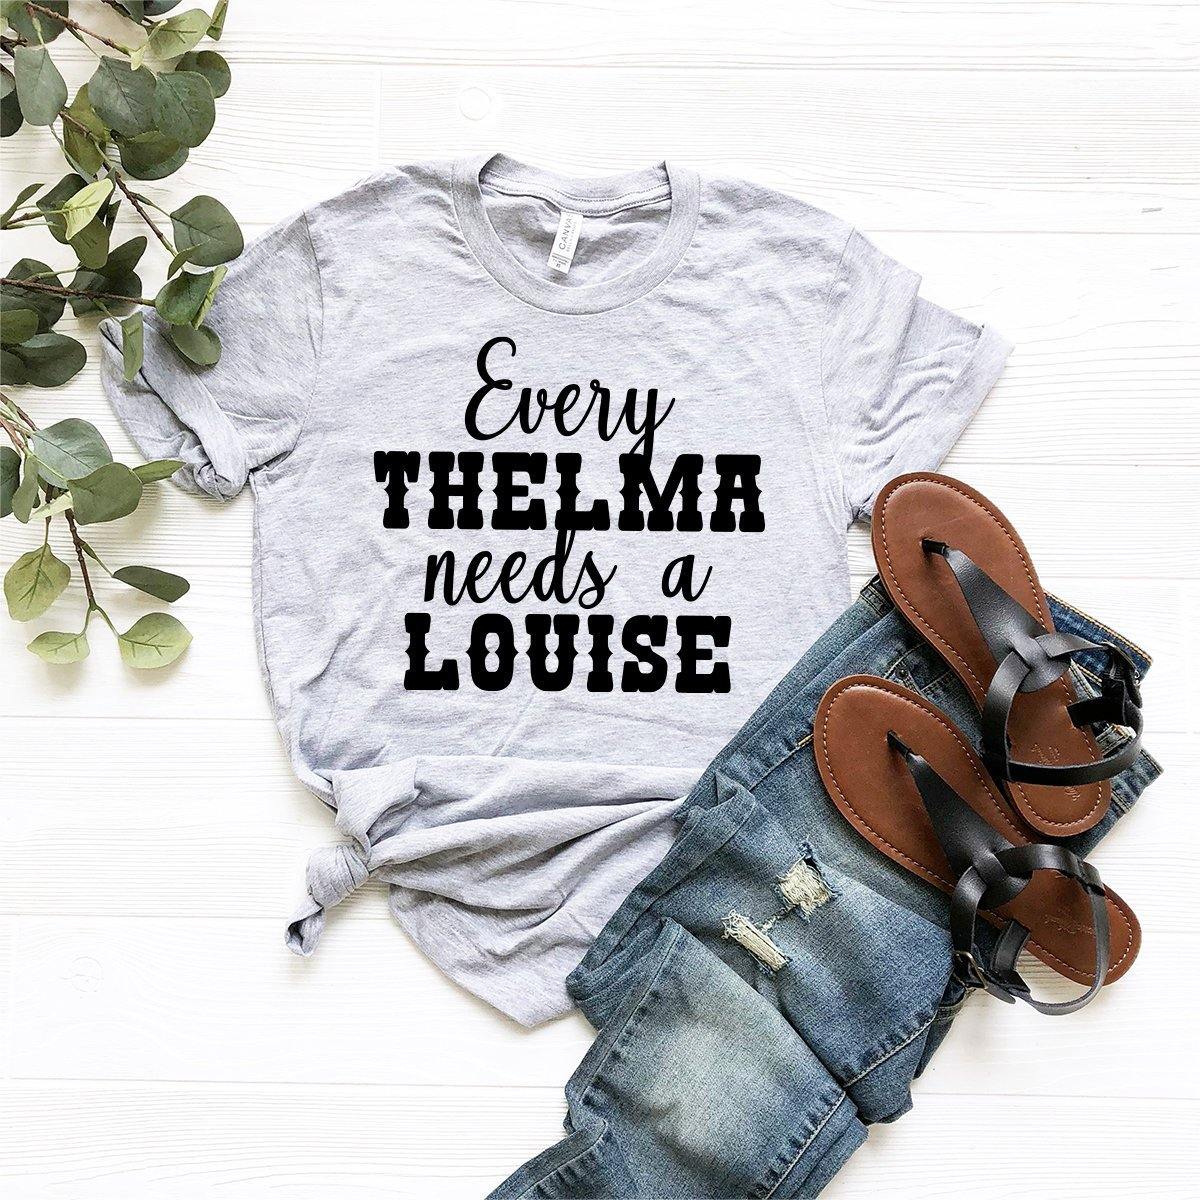 Thelma and Louise Gift,You Are The Thelma to My Louise, Best Friend Gifts, Friendship Jewelry, Friend Gift, Gift for BFF, Motivational Gift